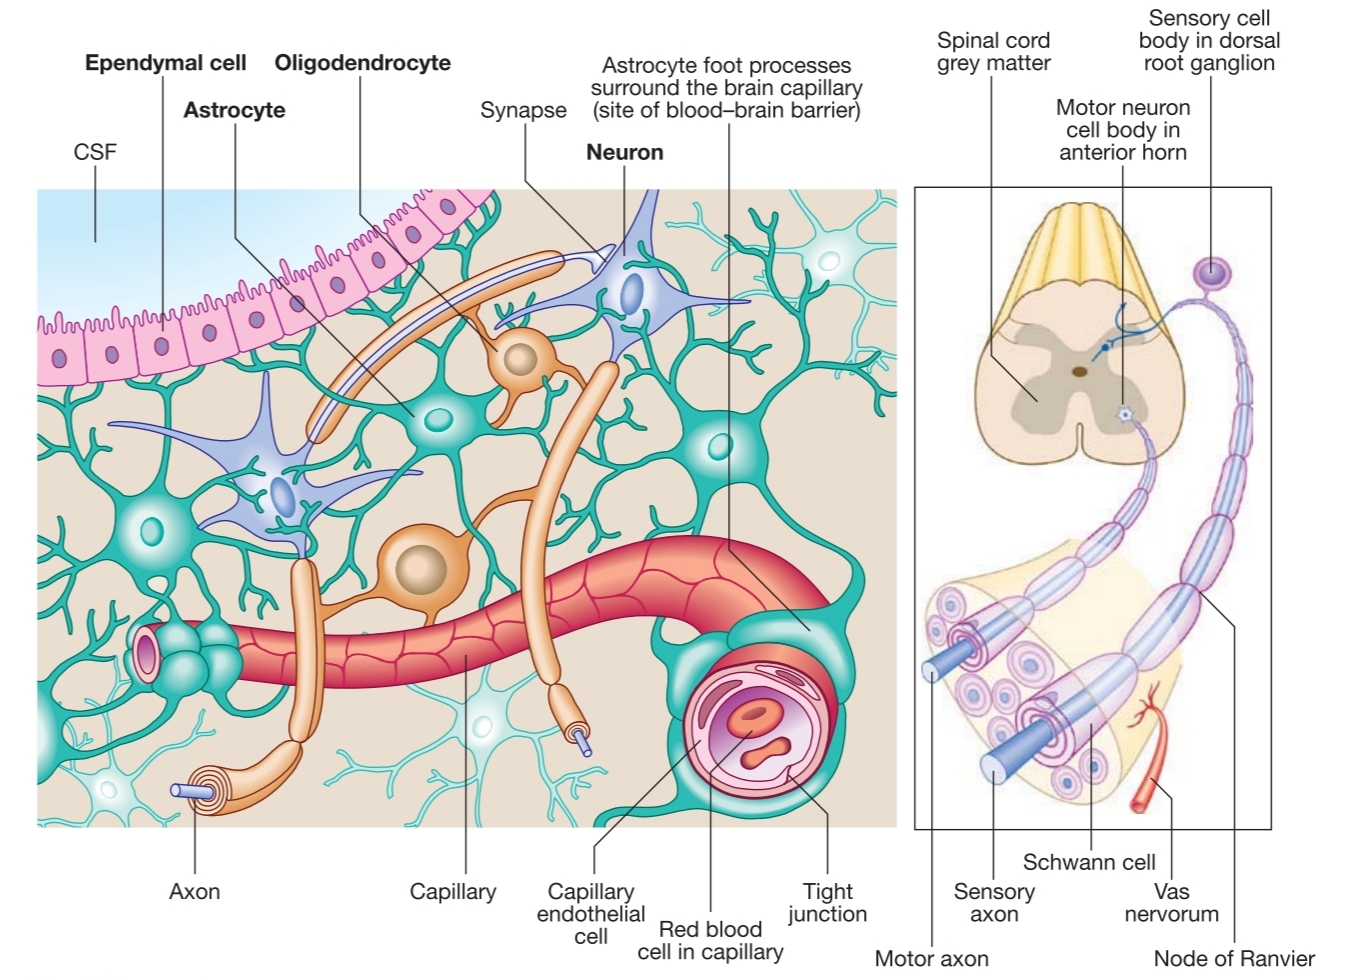 What are the cells of the nervous system?